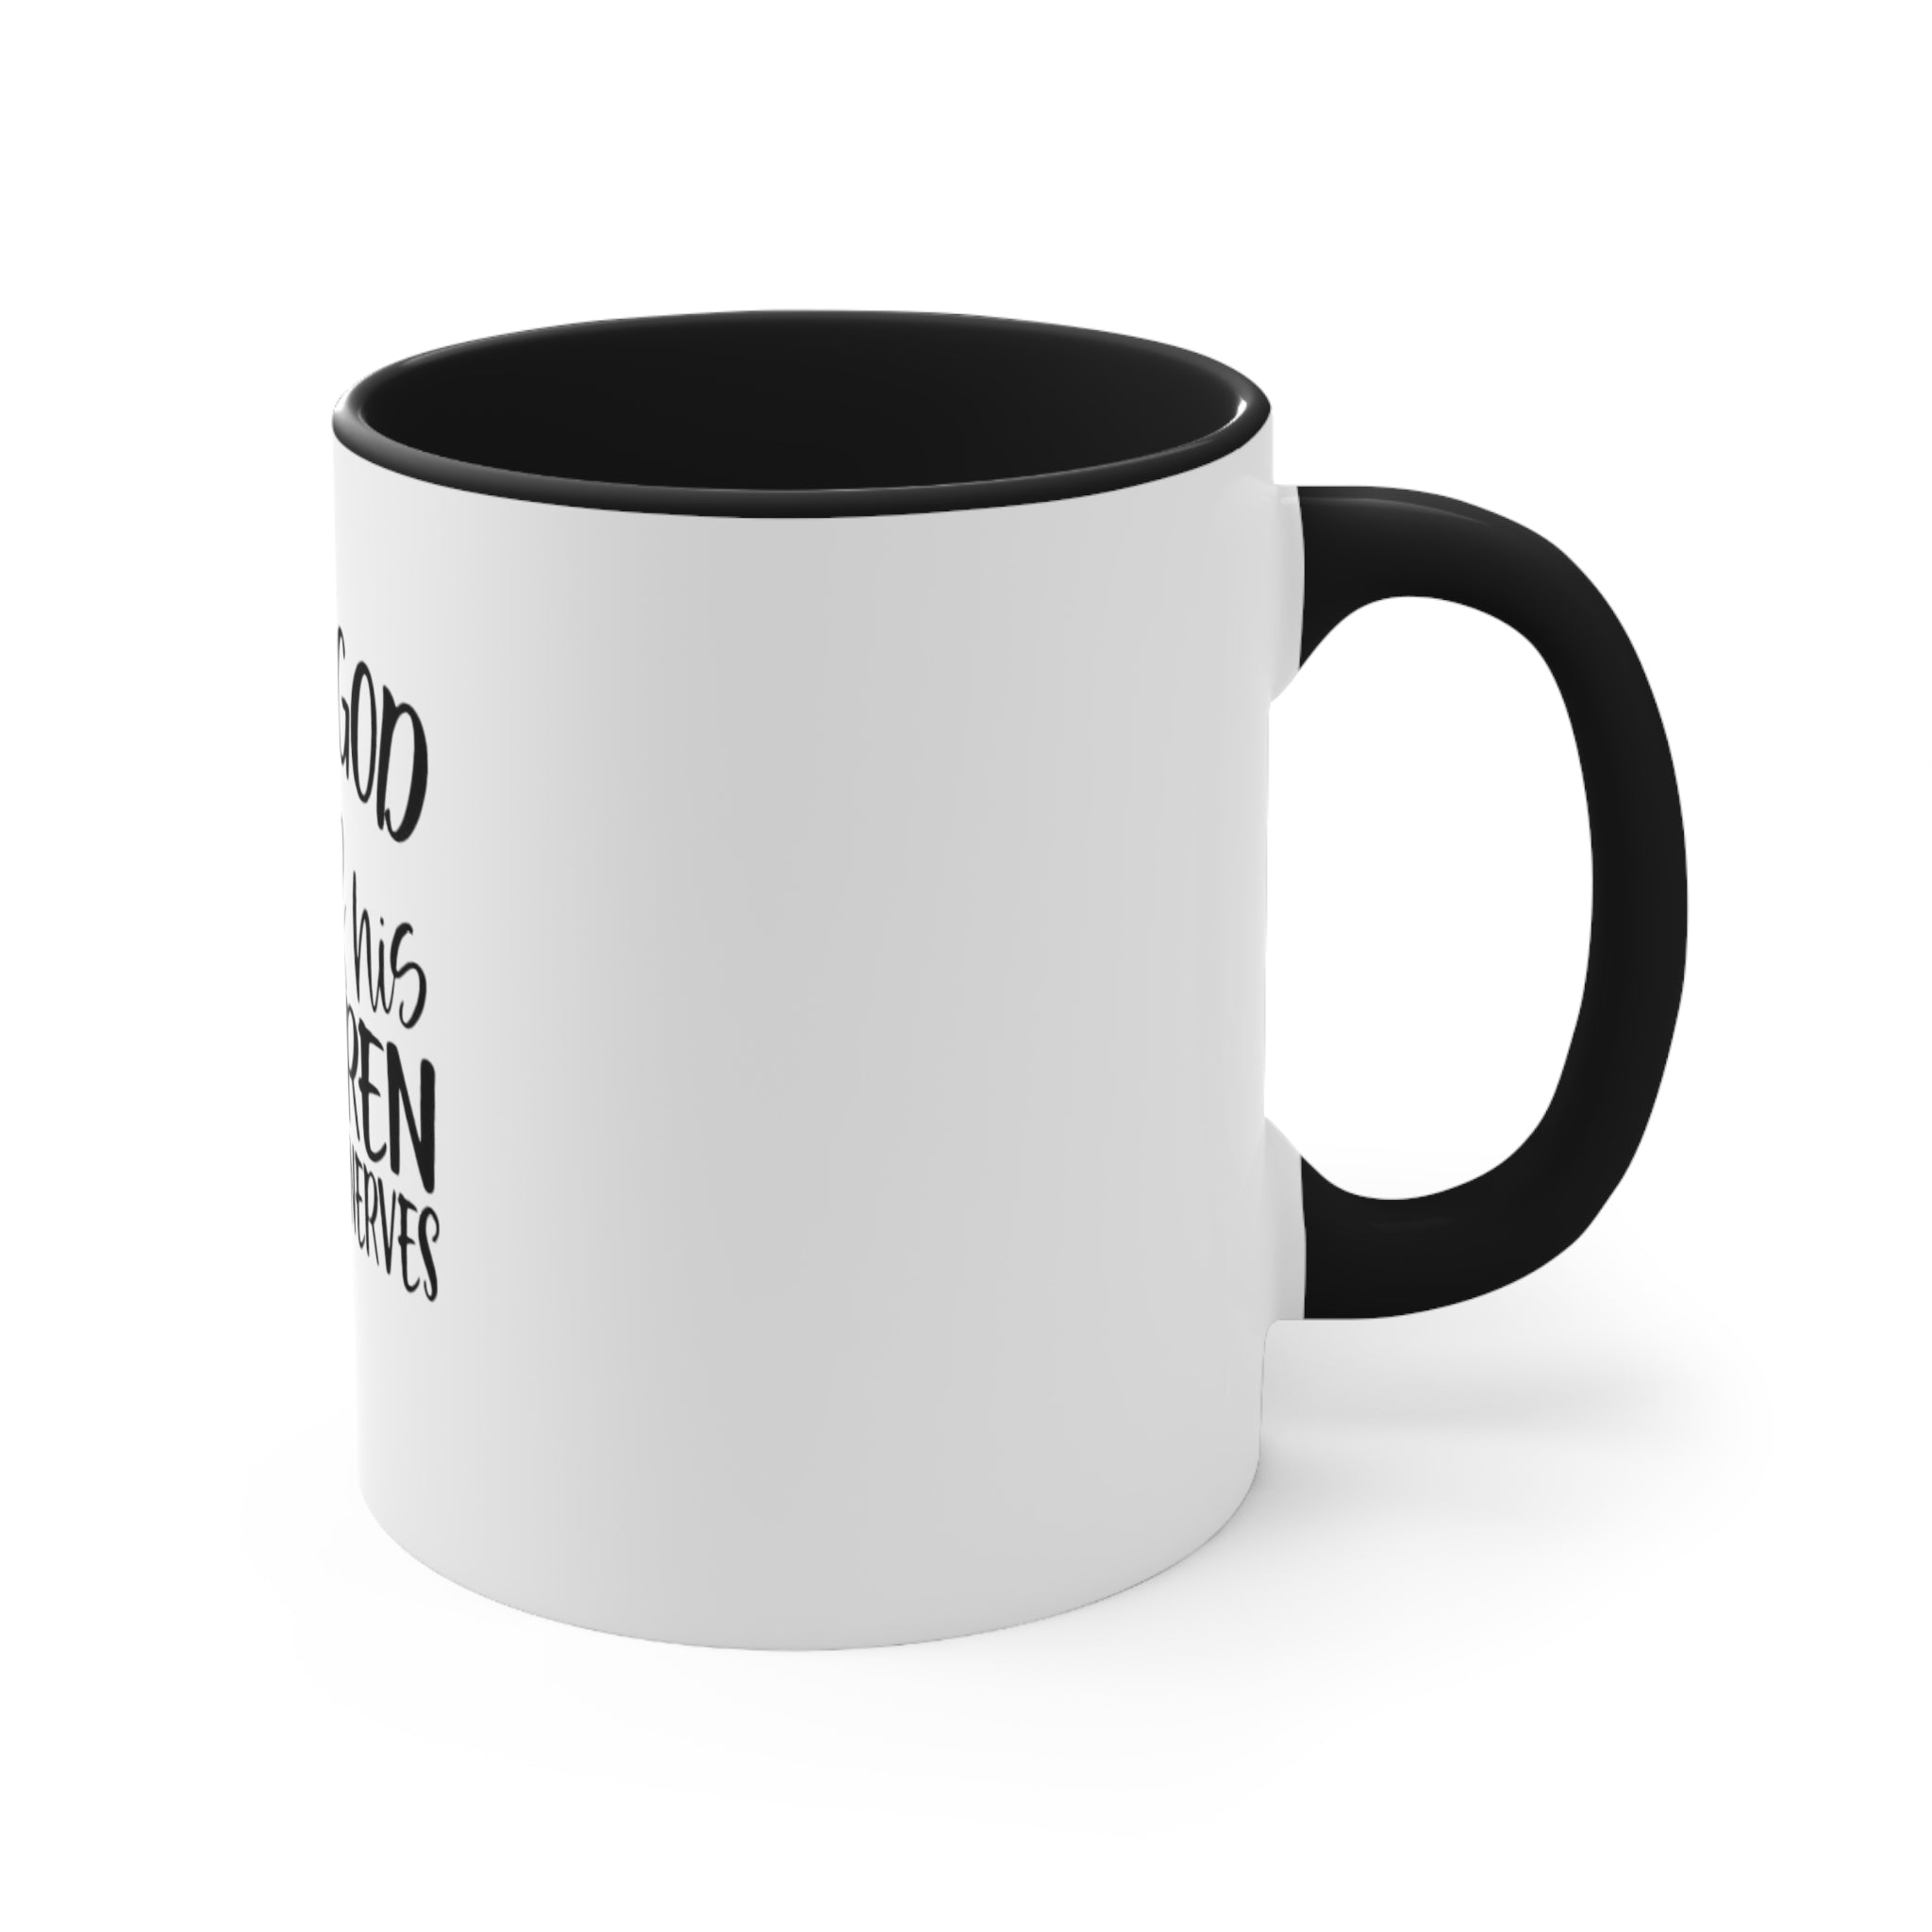 I Love God But Some Of His Children Get On My Nerves Accent Coffee Mug, 11oz